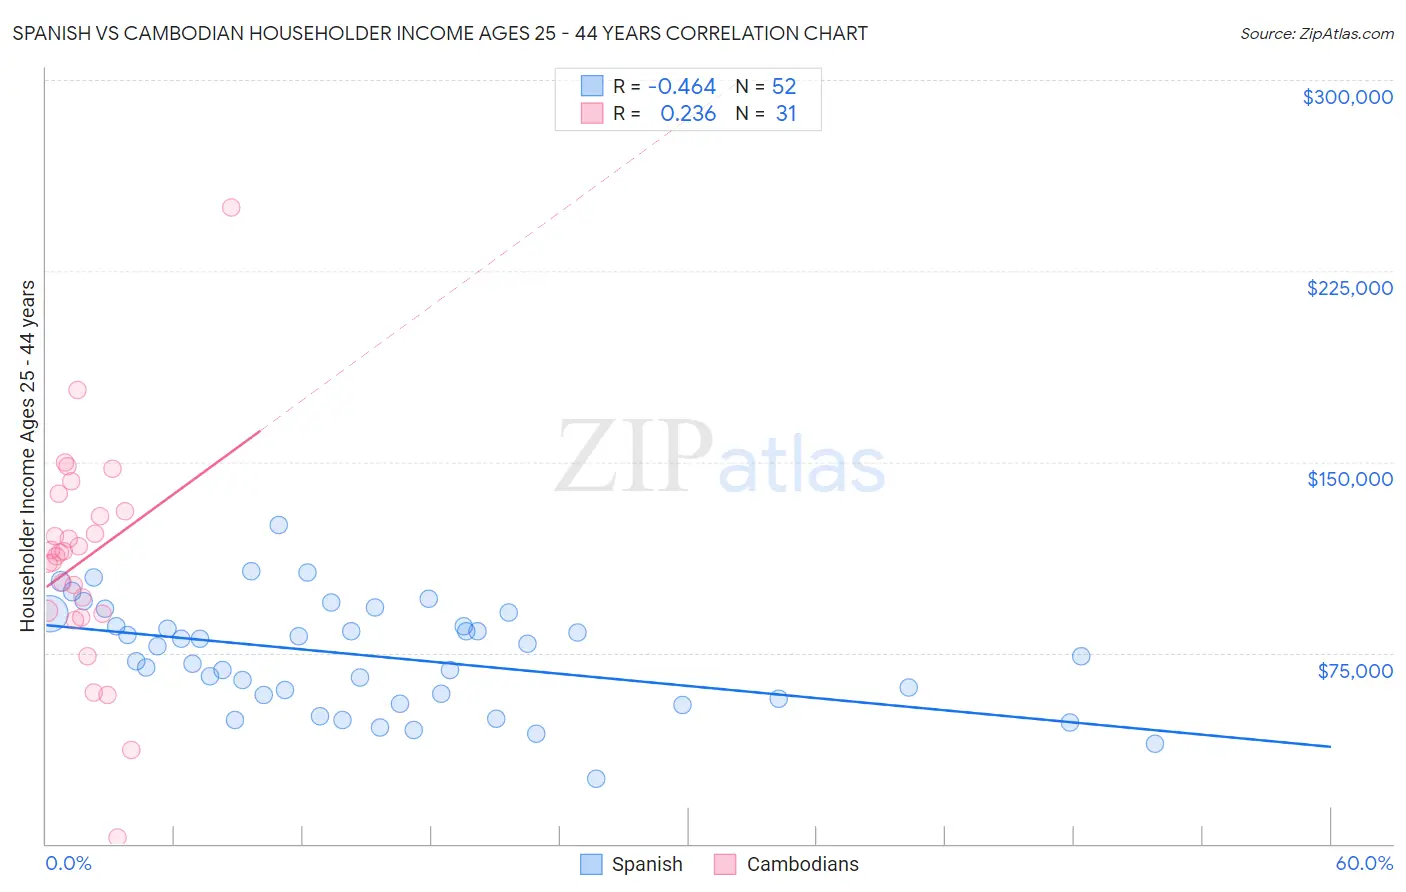 Spanish vs Cambodian Householder Income Ages 25 - 44 years